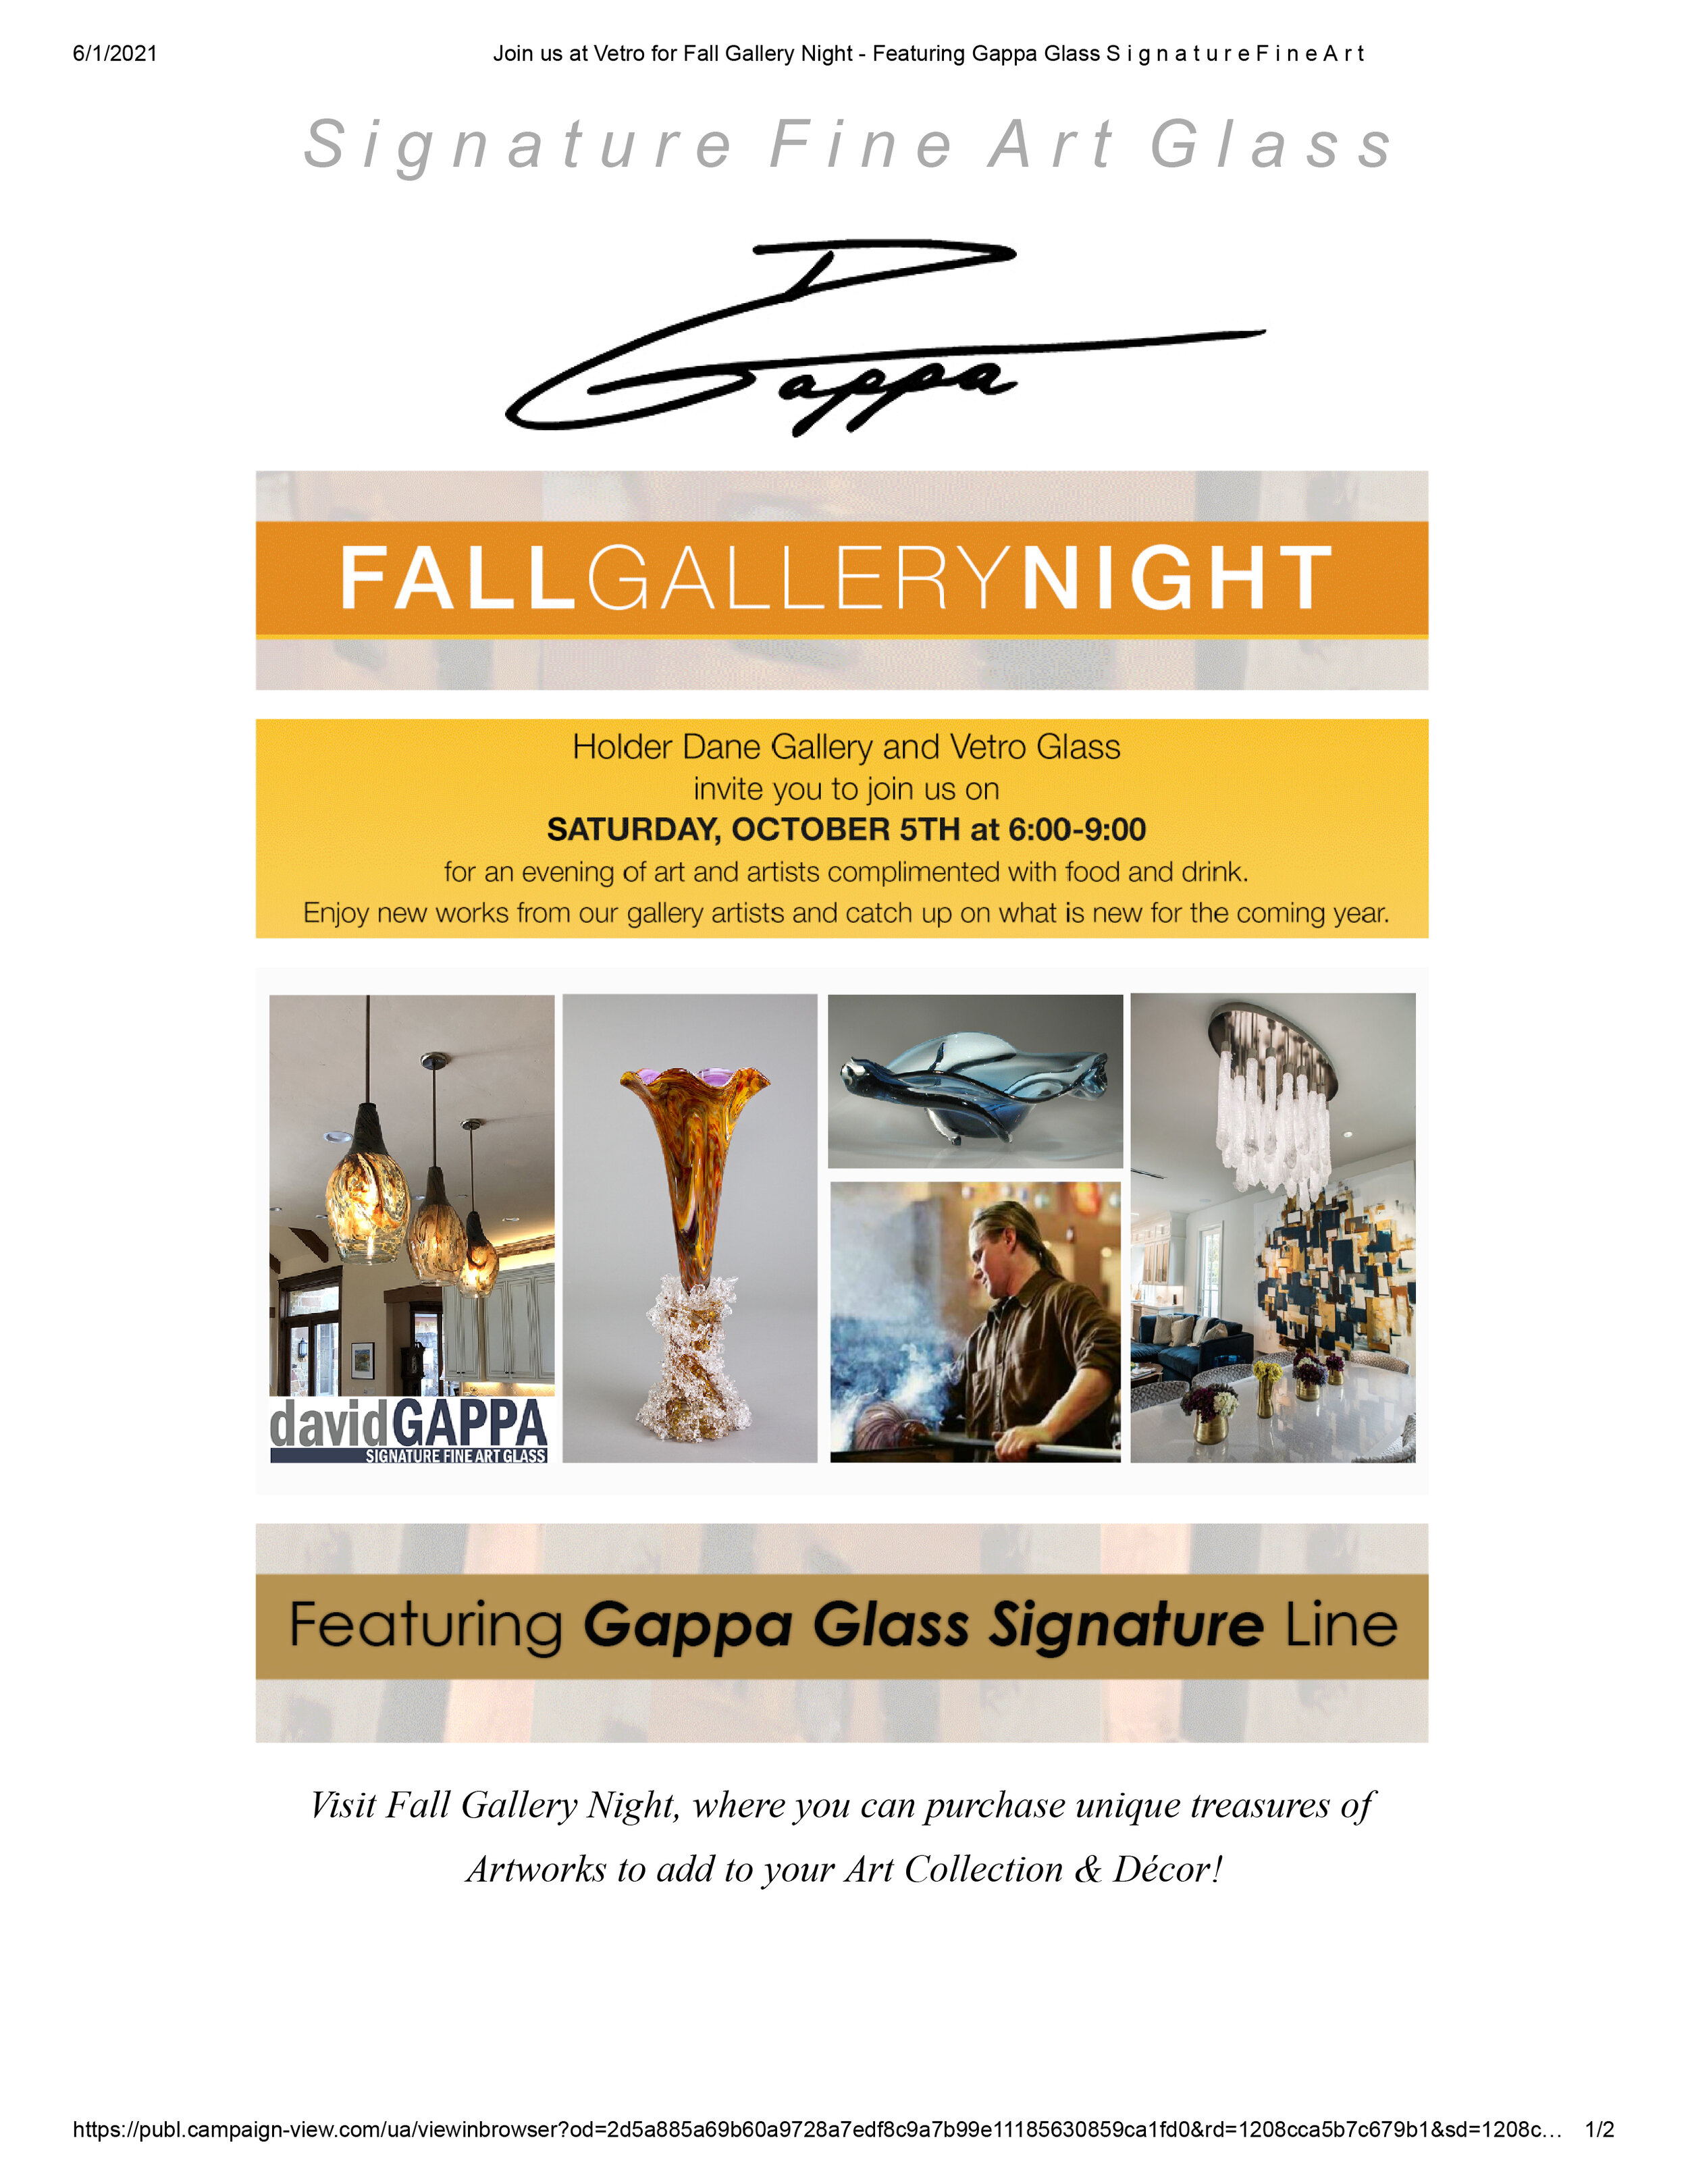 Join us at Vetro for Fall Gallery Night - Featuring Gappa Glass S i g n a t u r e F i n e A r t-1.jpg